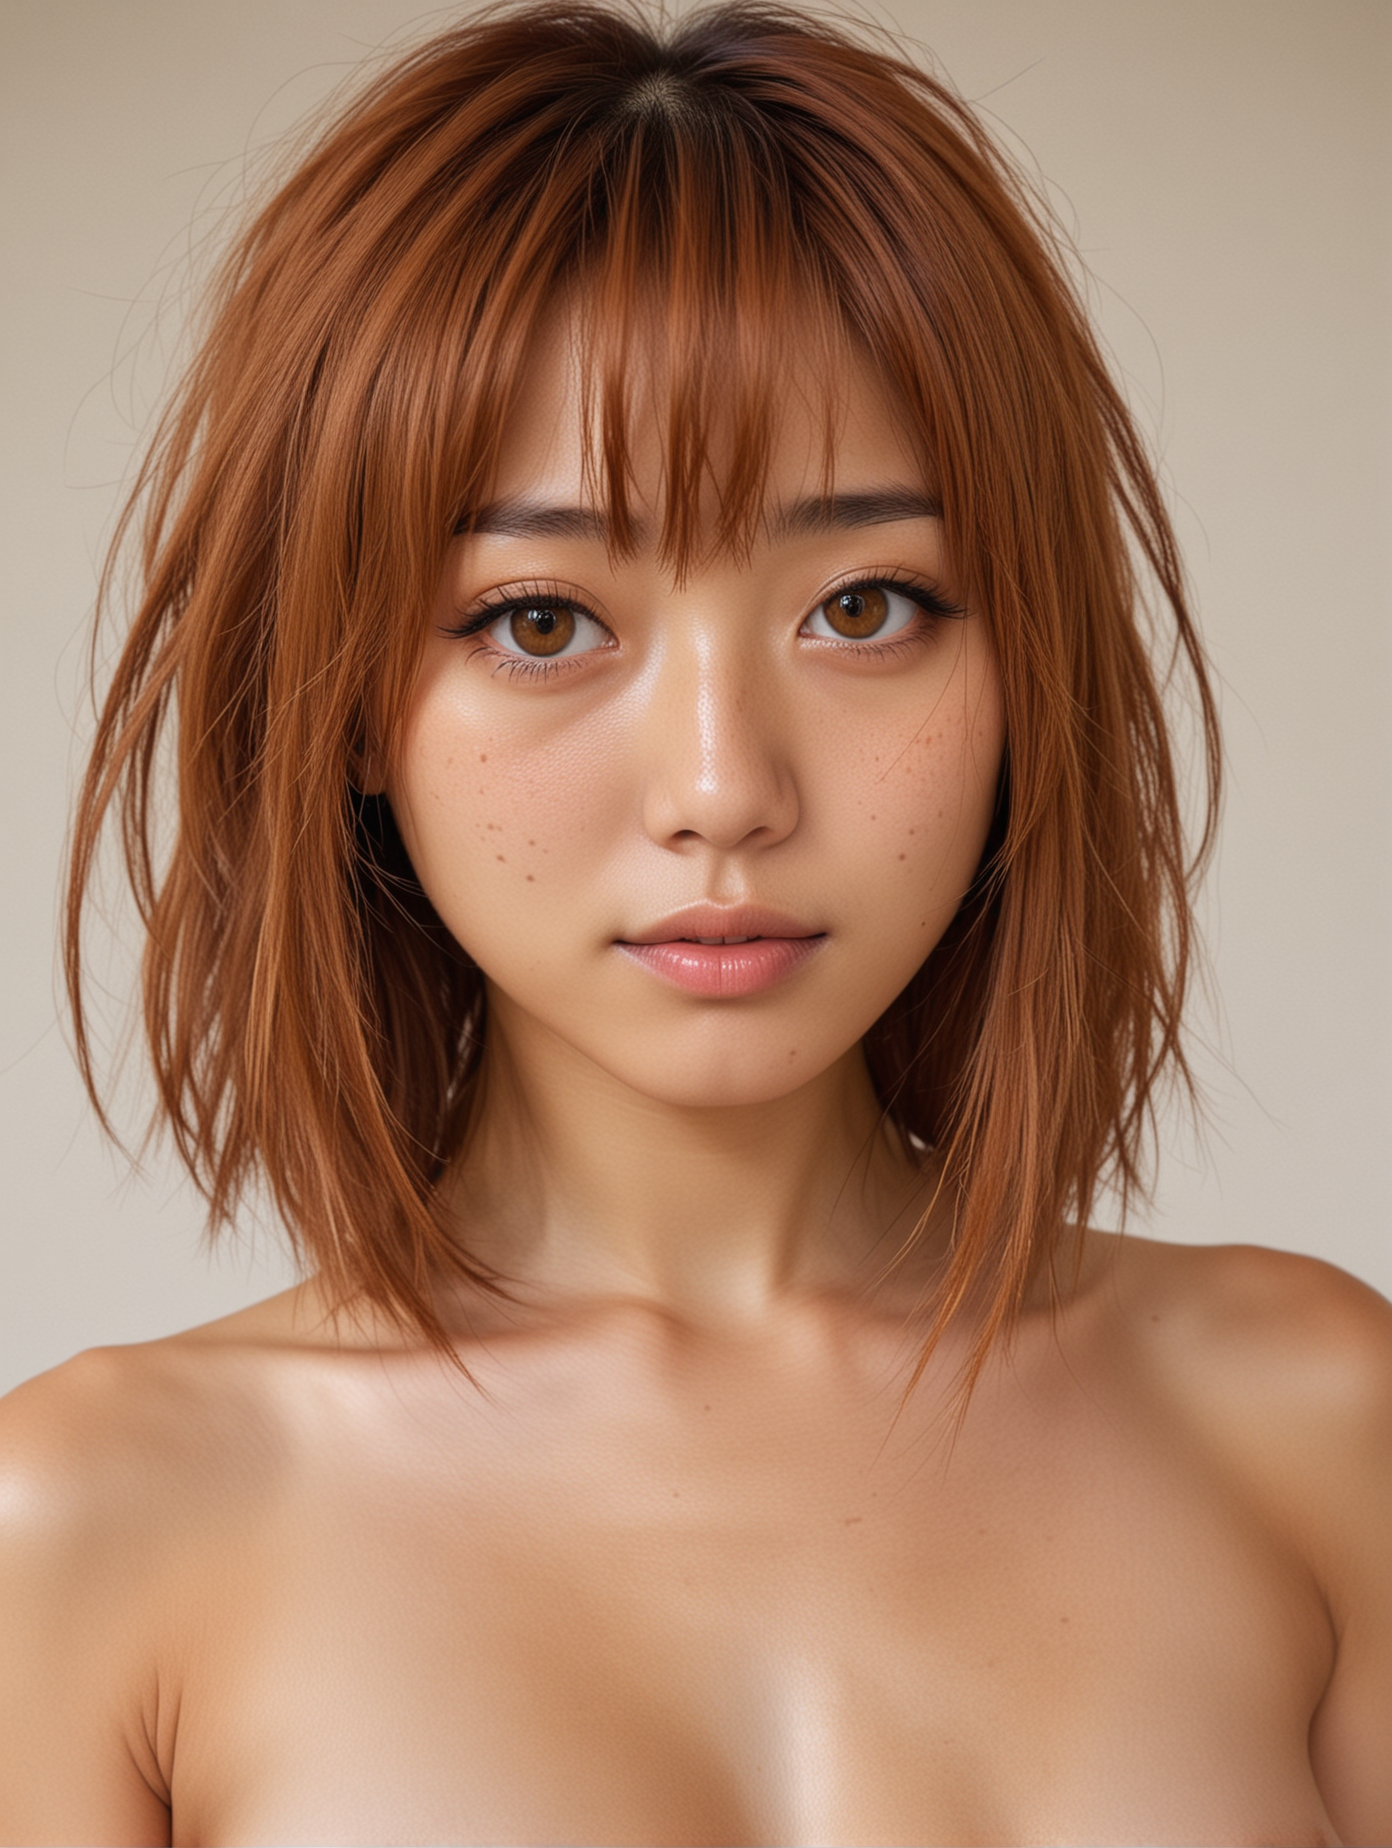 Japanese Girl with CaramelColored Hair Freckles and Amber Eyes Innocence Captured in Portrait